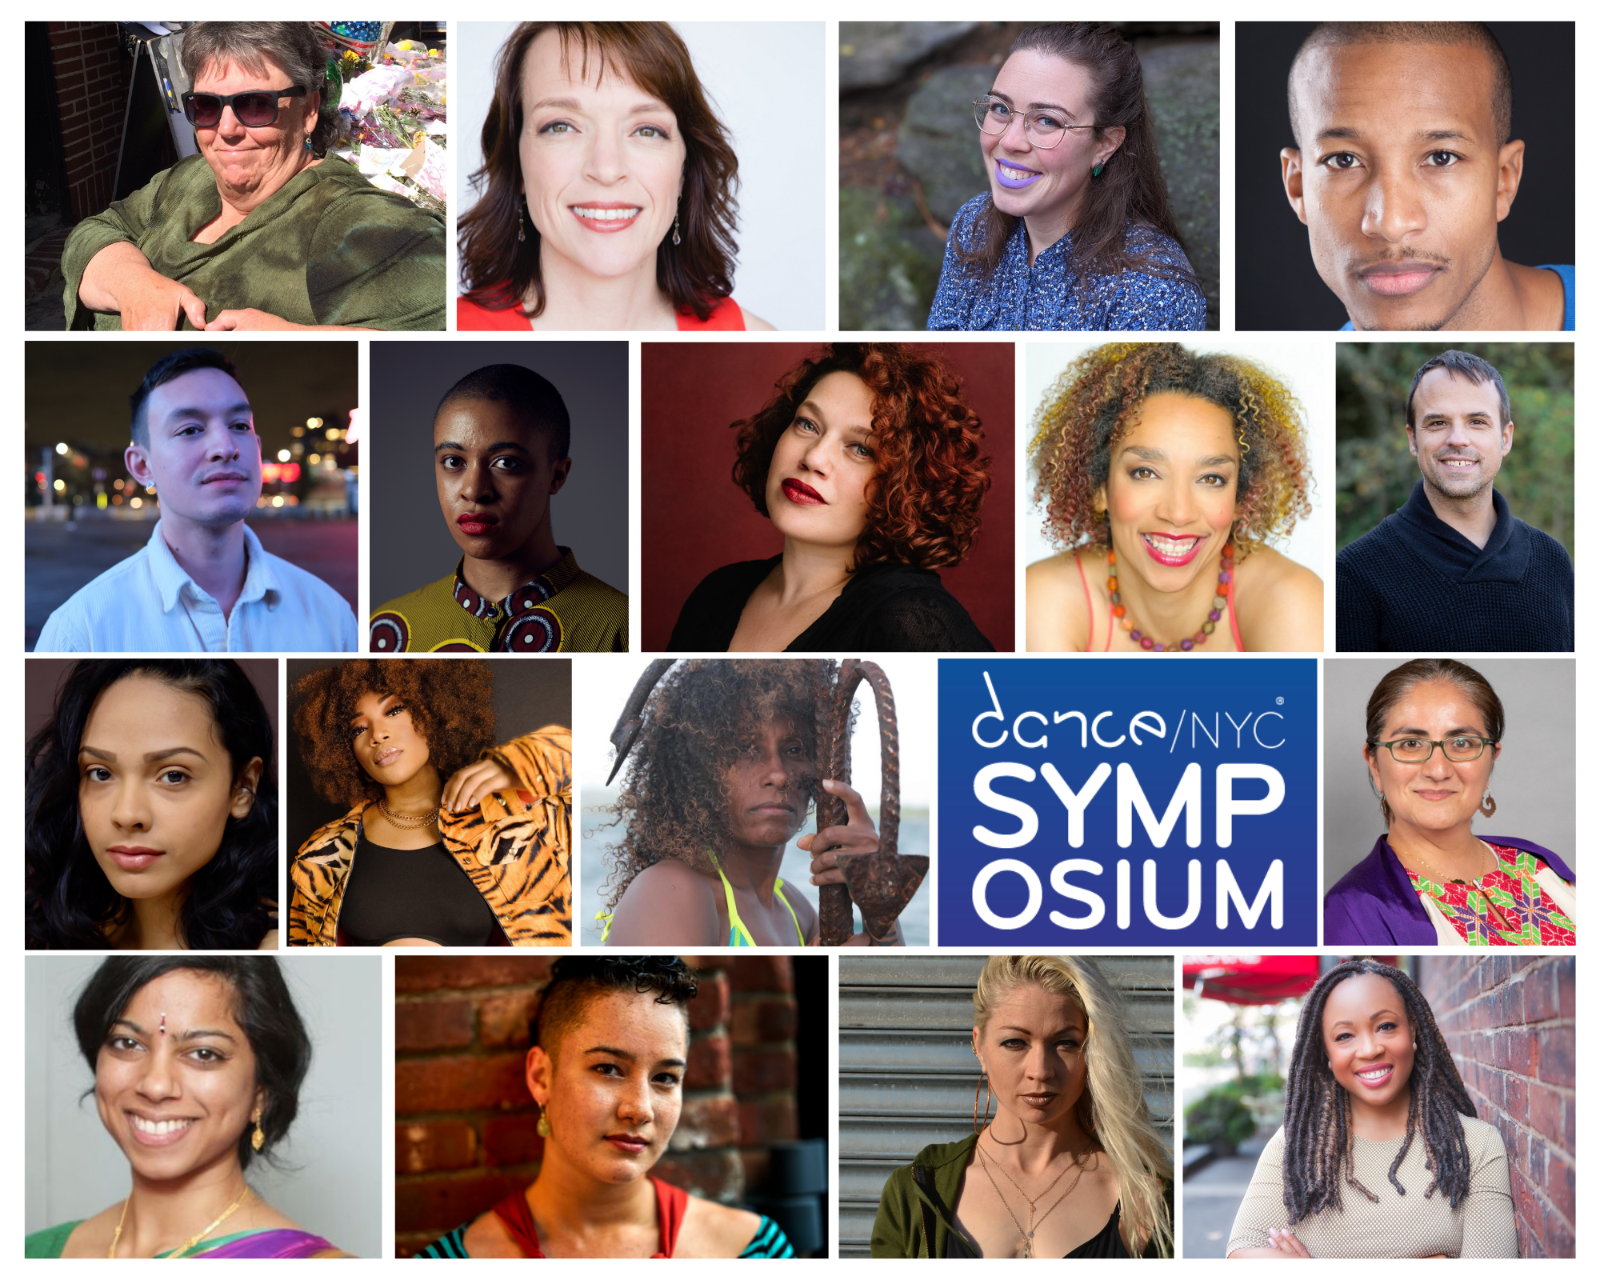 A collage of 17 of the Dance/NYC 2022 Symposium Speakers. From left to right and top to bottom, Corbett Joan OToole, Sarah Wilbur, Alison Kopit, Darian Marcel Parker, PhD, Kyle Dacuyan, Maya Simone Z., Alexandra Beller, Alice Sheppard, Andre Bouchard, Beverly Lopez, Judith McCarty, Nia Love, Paula Sánchez-Kucukozer, Sahasra Sambamoorthi, Sarah Chien, Stacie Webster, Sydnie Liggett-Dennis